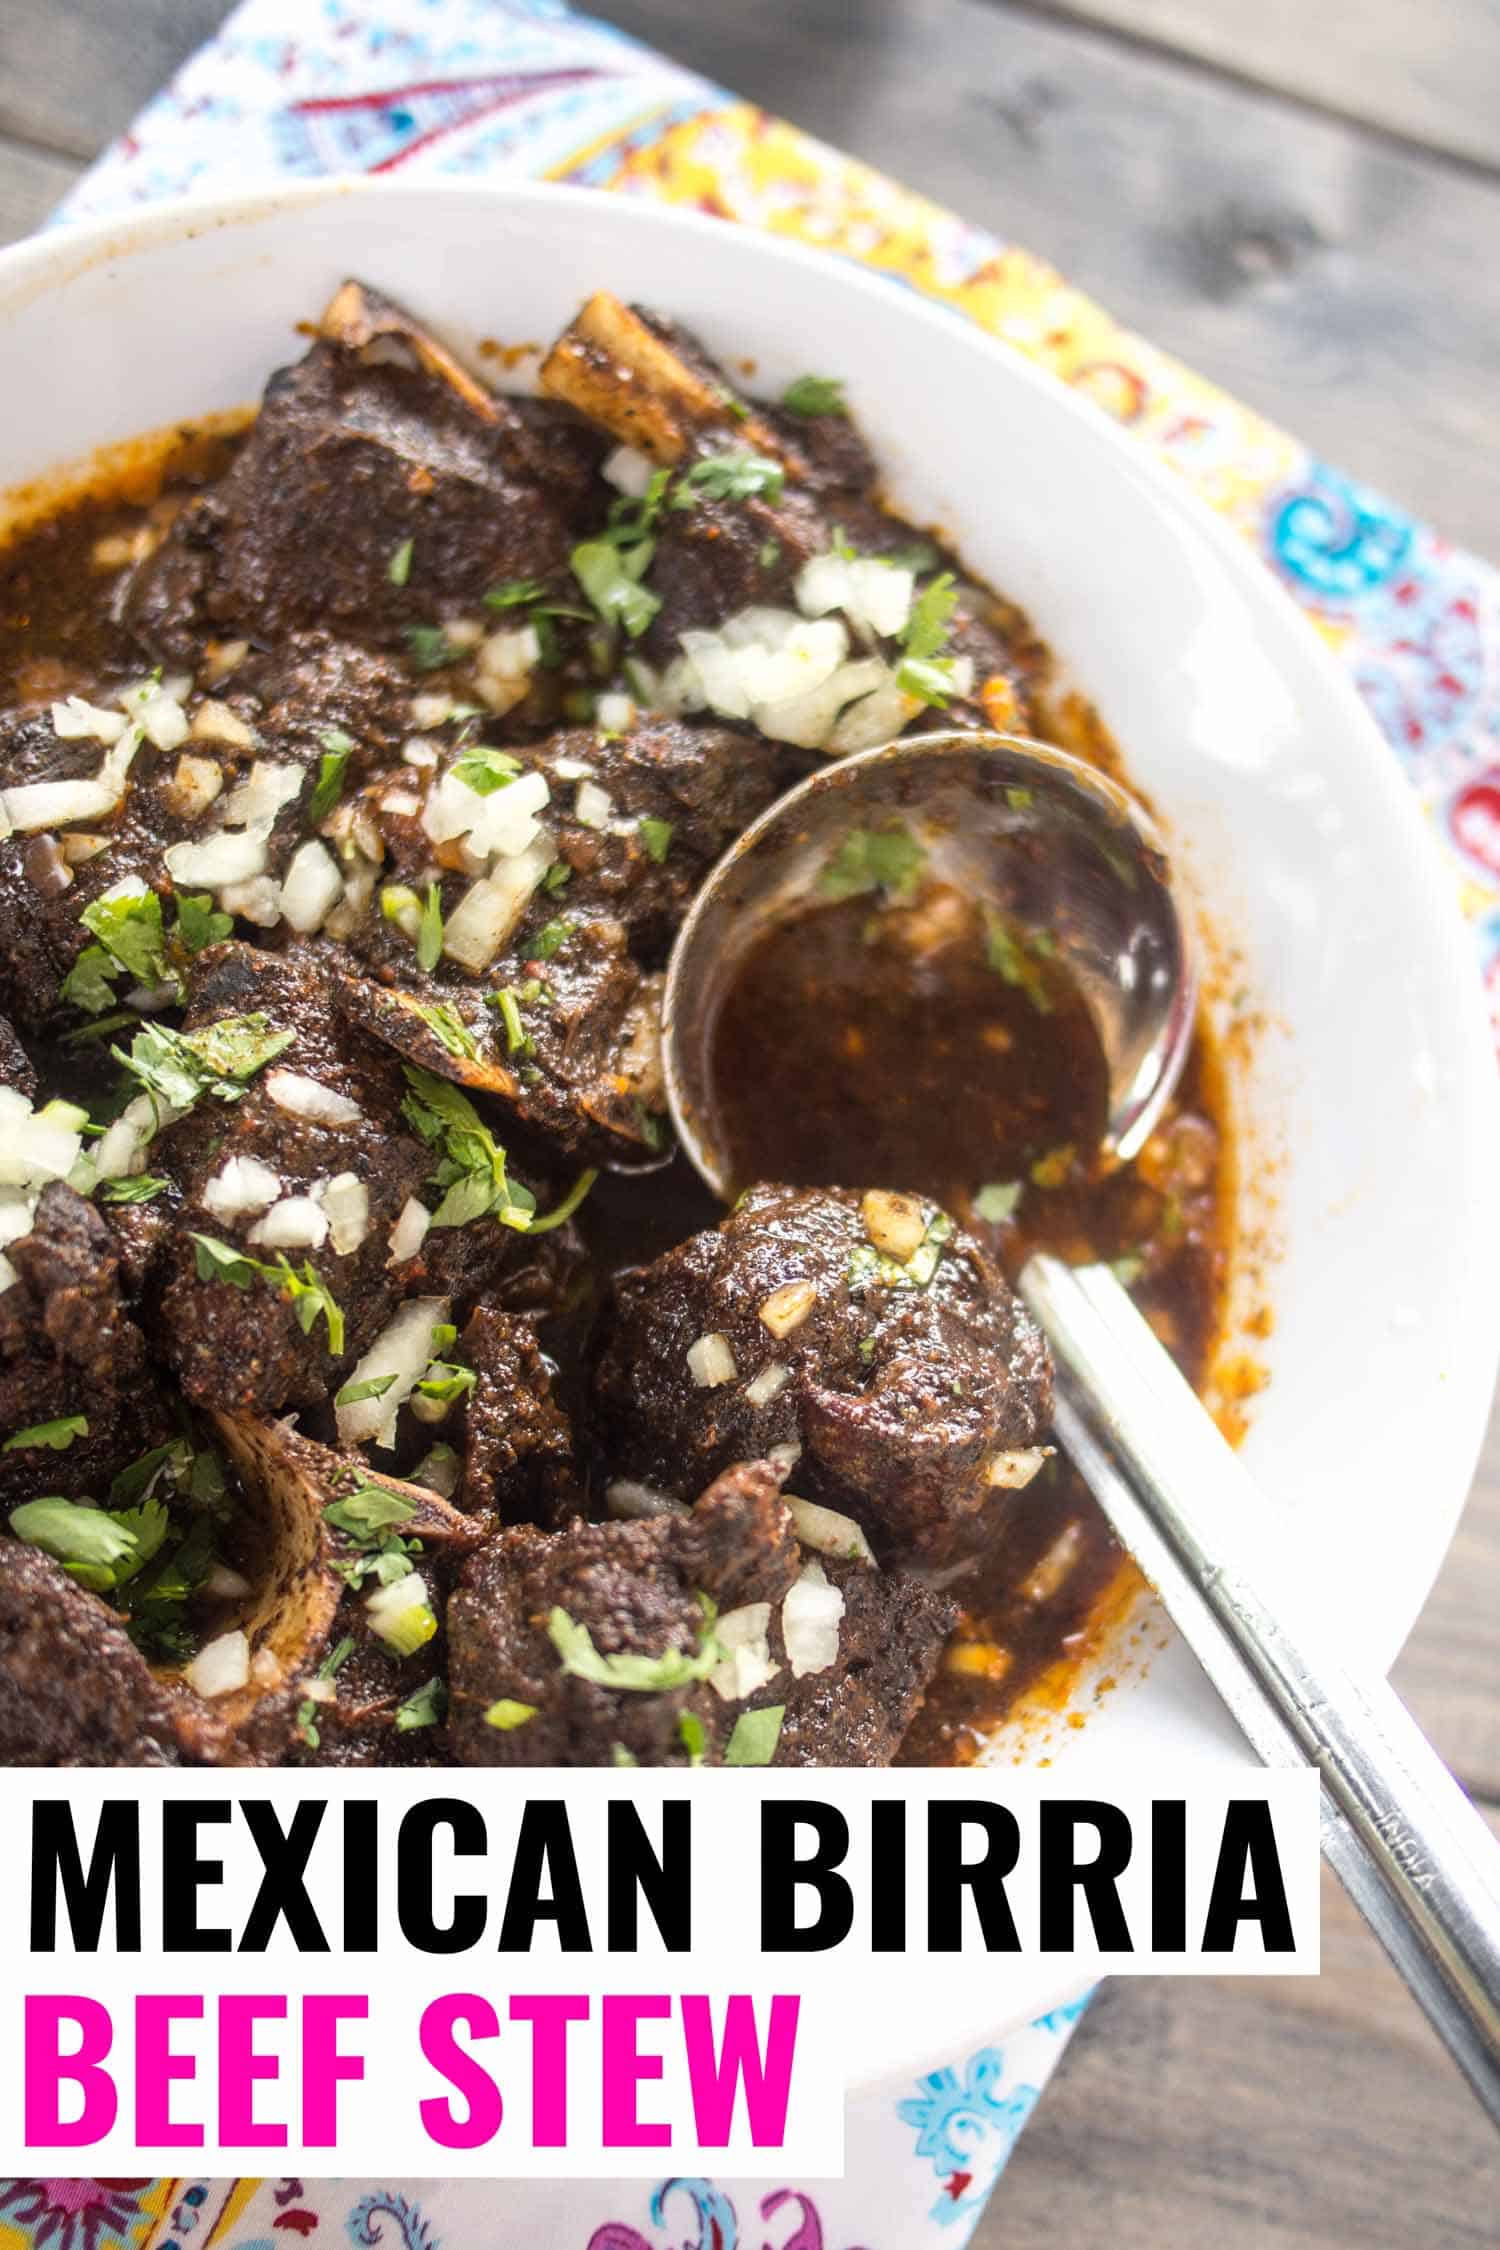 Mexican beef stew birria on a table